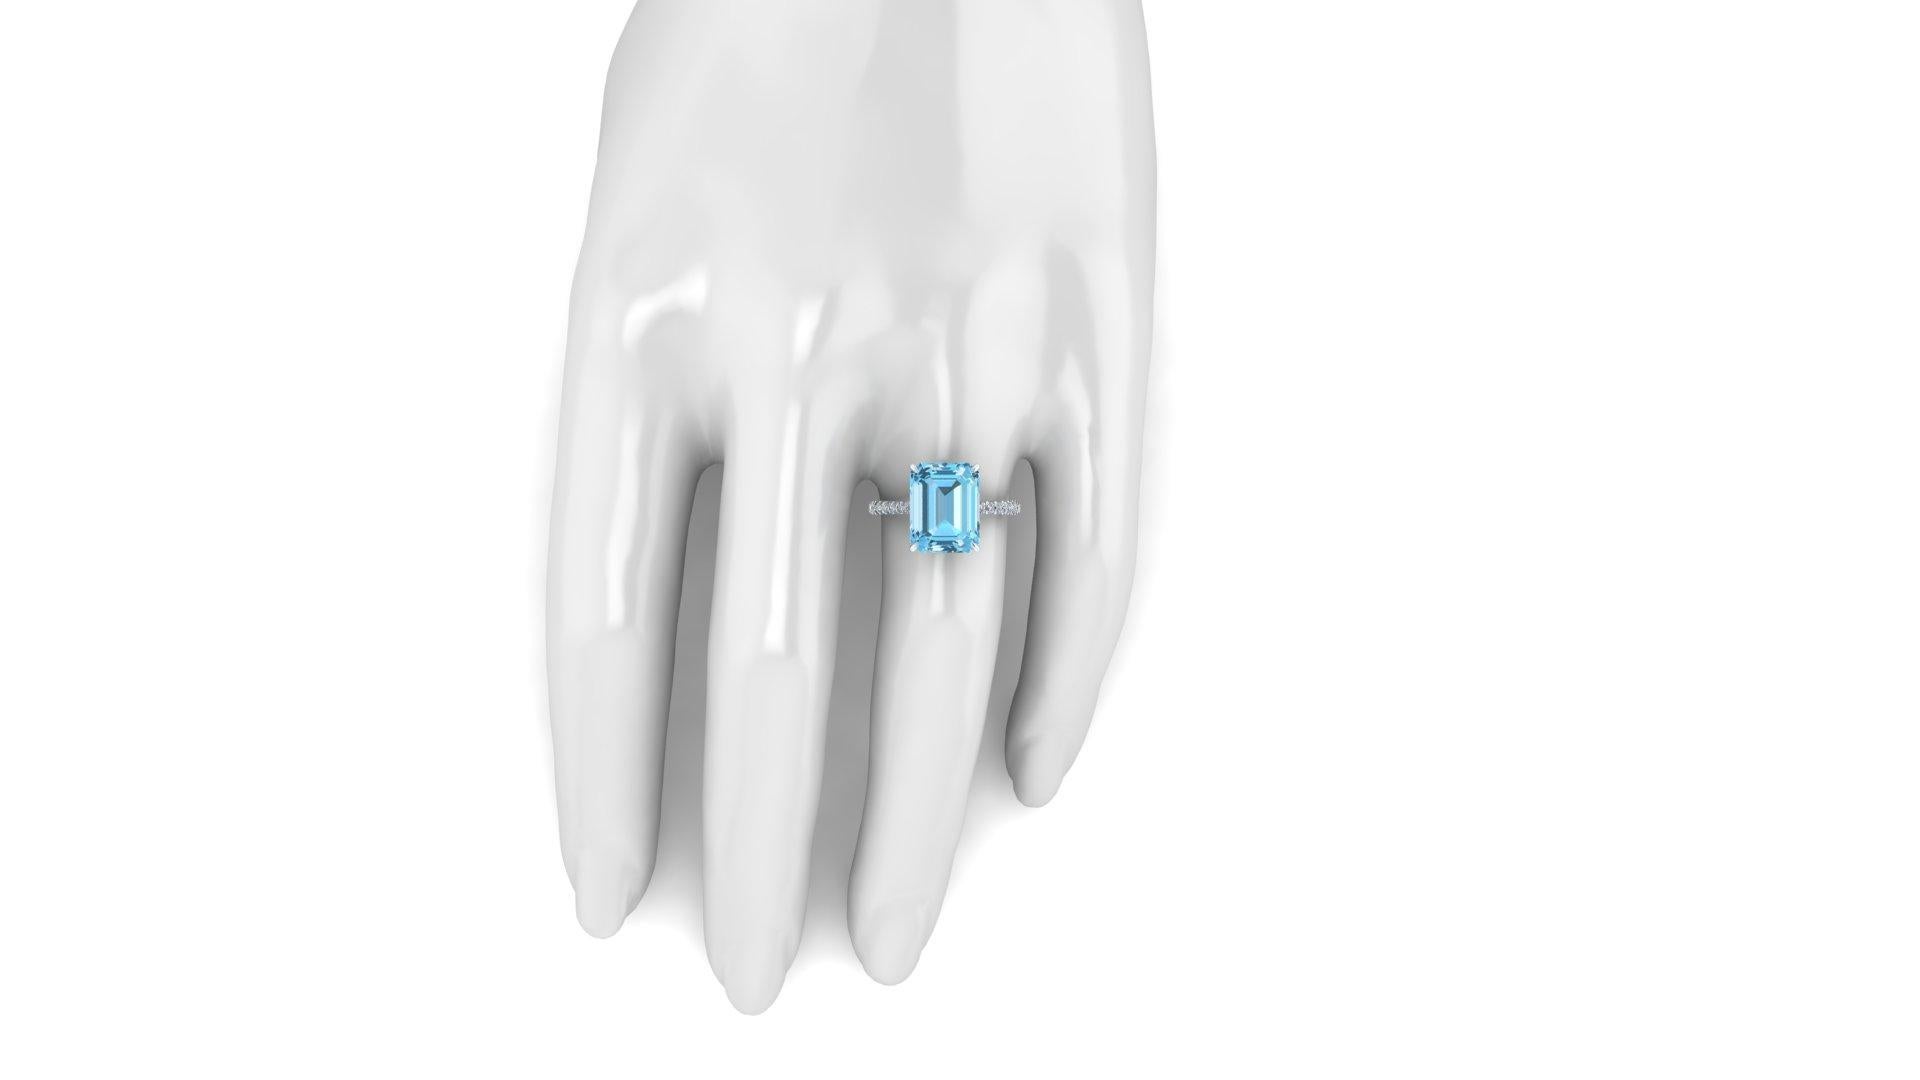 3.62 carat Aquamarine, emerald cut, very high quality color, superior blue, eye clean gem, accompanied a pave' of bright diamonds of approximately  total carat weight of 0.38 carat, set in an hand crafted, delicate and sophisticated looking 14k whie